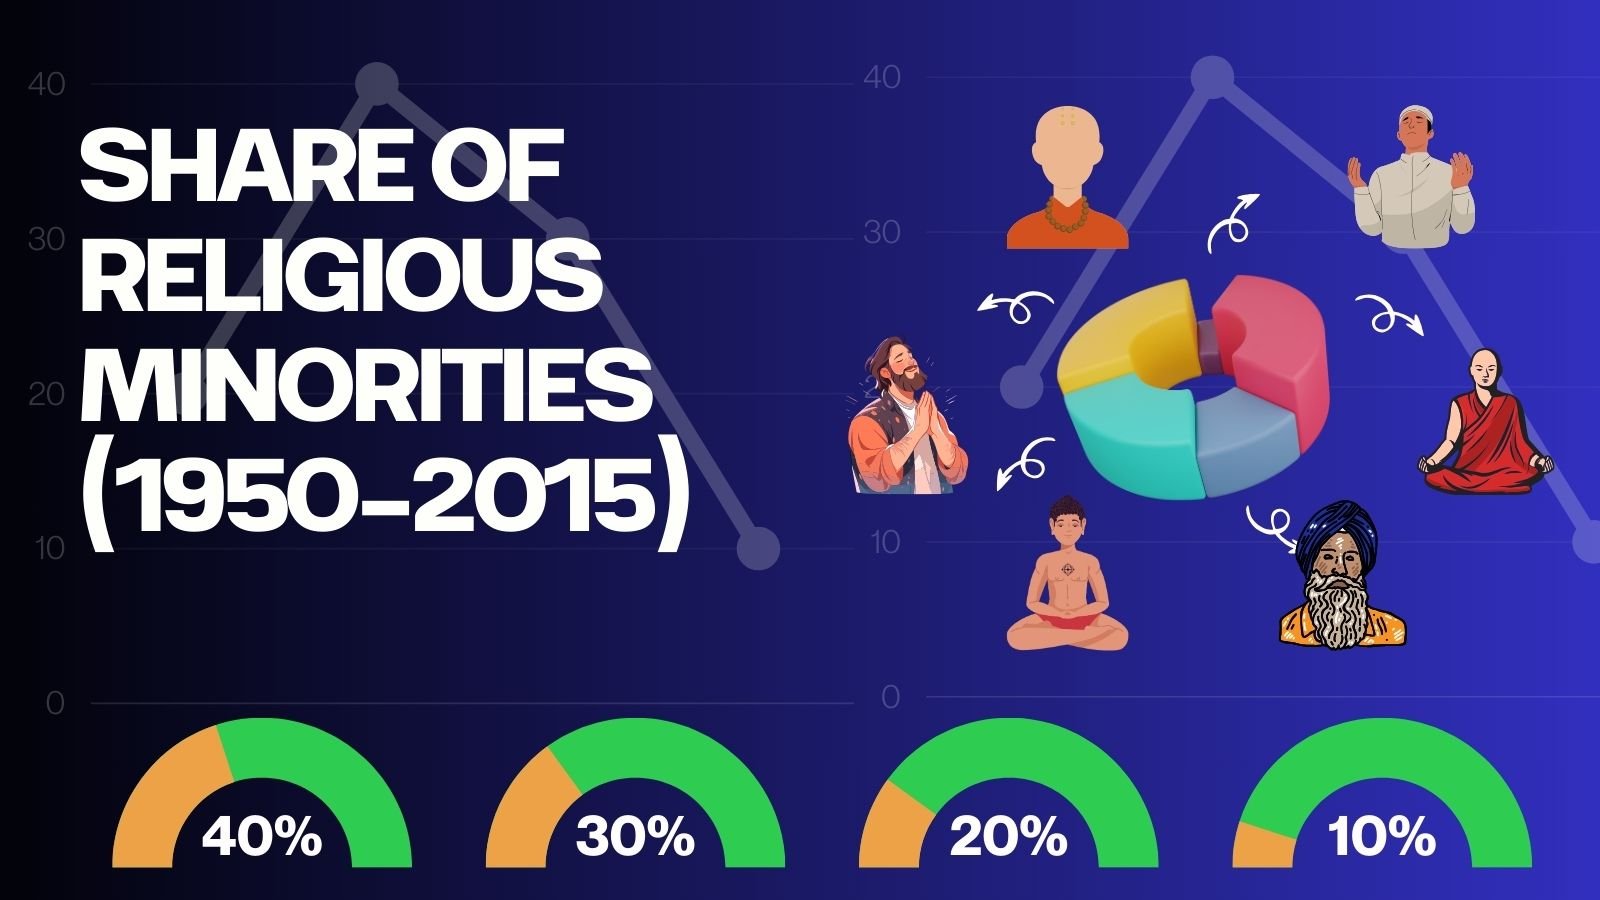 Share of Religious Minorities: A Cross-Country Analysis (1950-2015) by PM-EAC